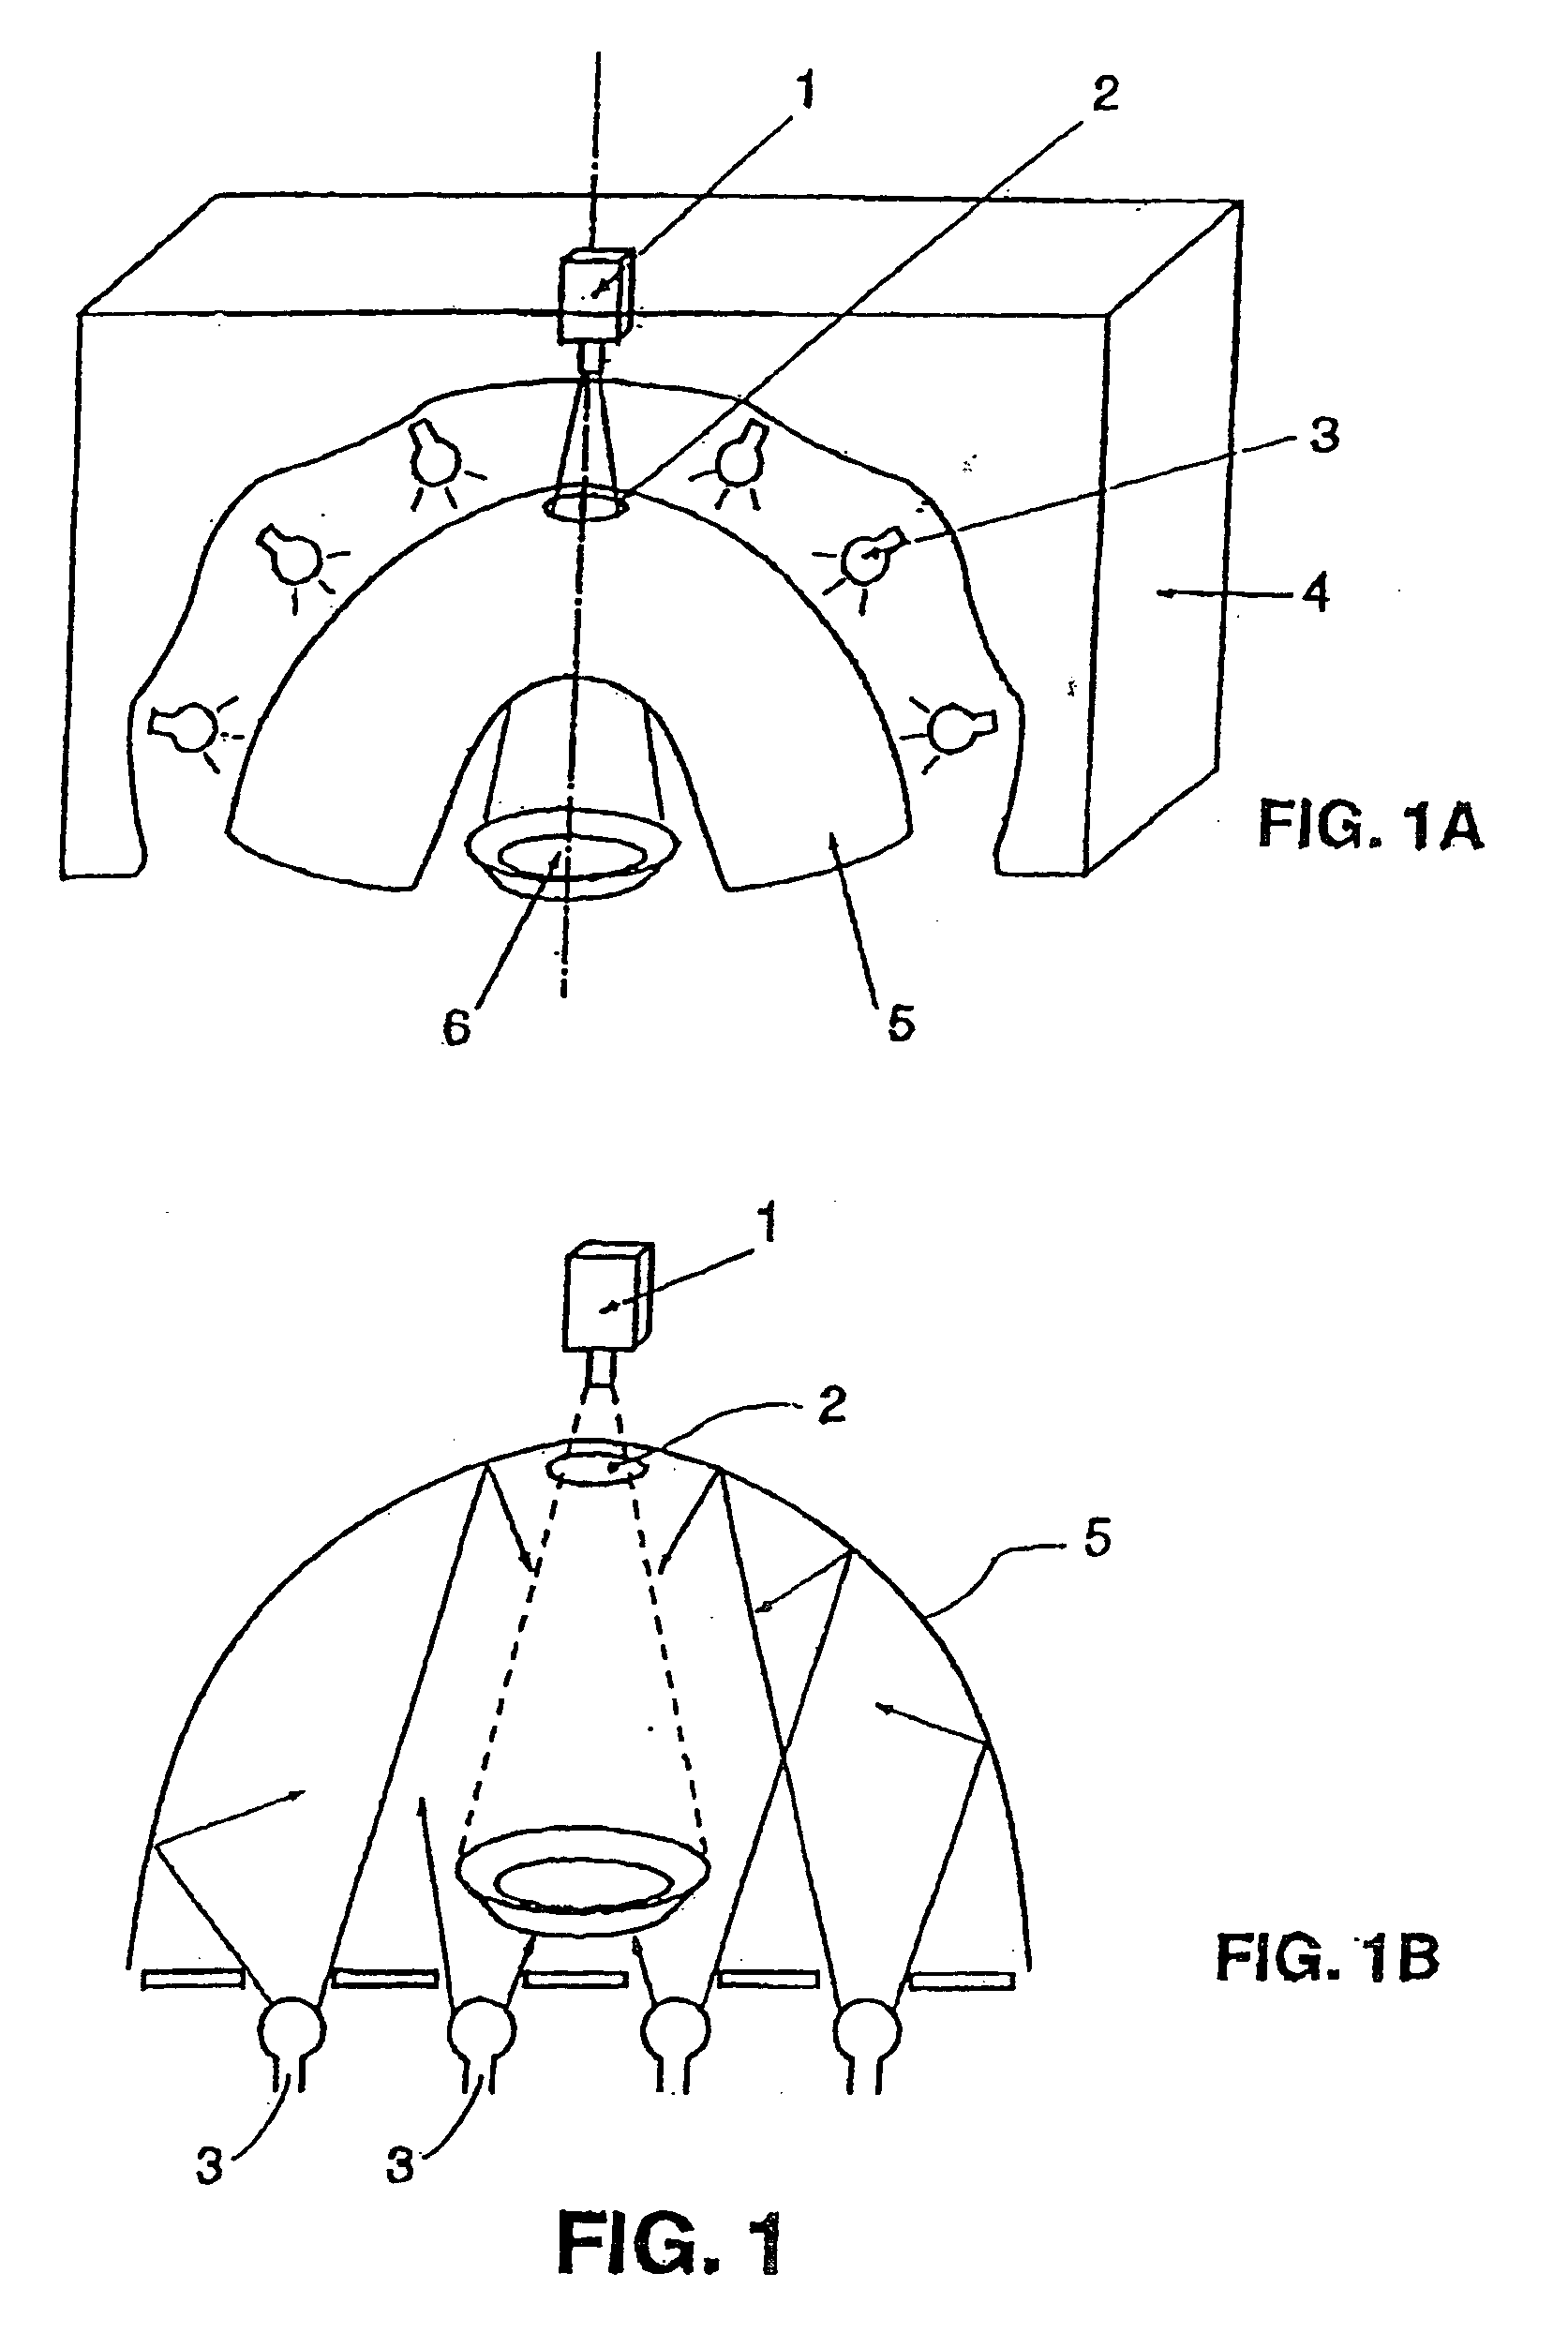 Device and method for optical control under diffuse illumination and observation means of crockery items or any glazed ceramic products